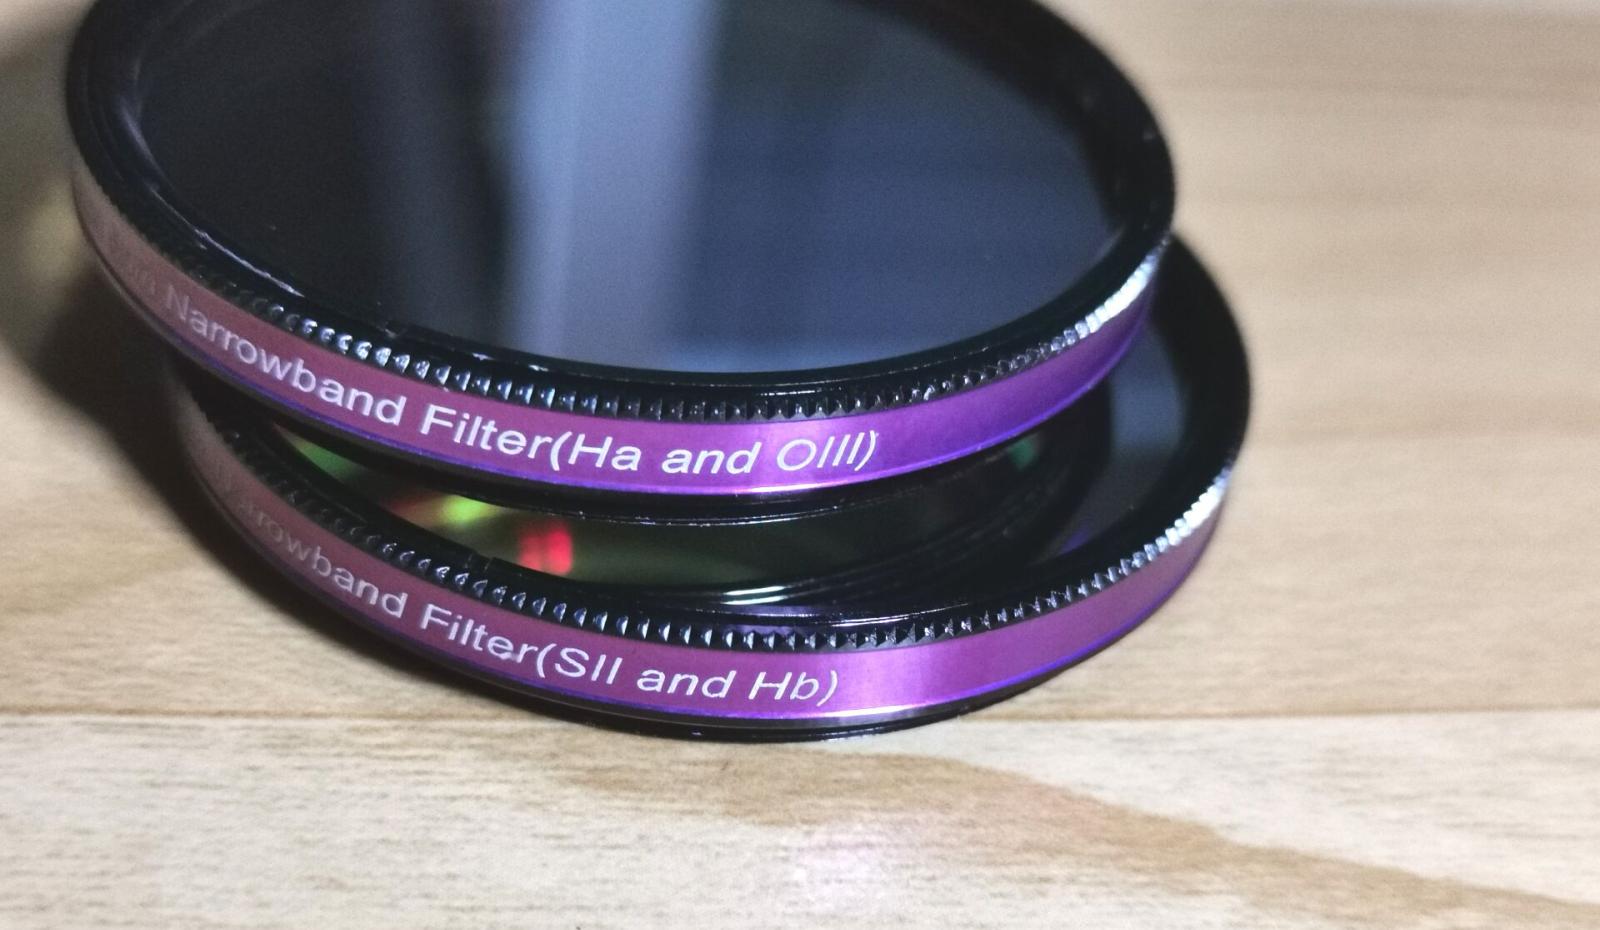 New product！Antlia ALP-T Dualband 5nm SII and Hb filter - Vendor